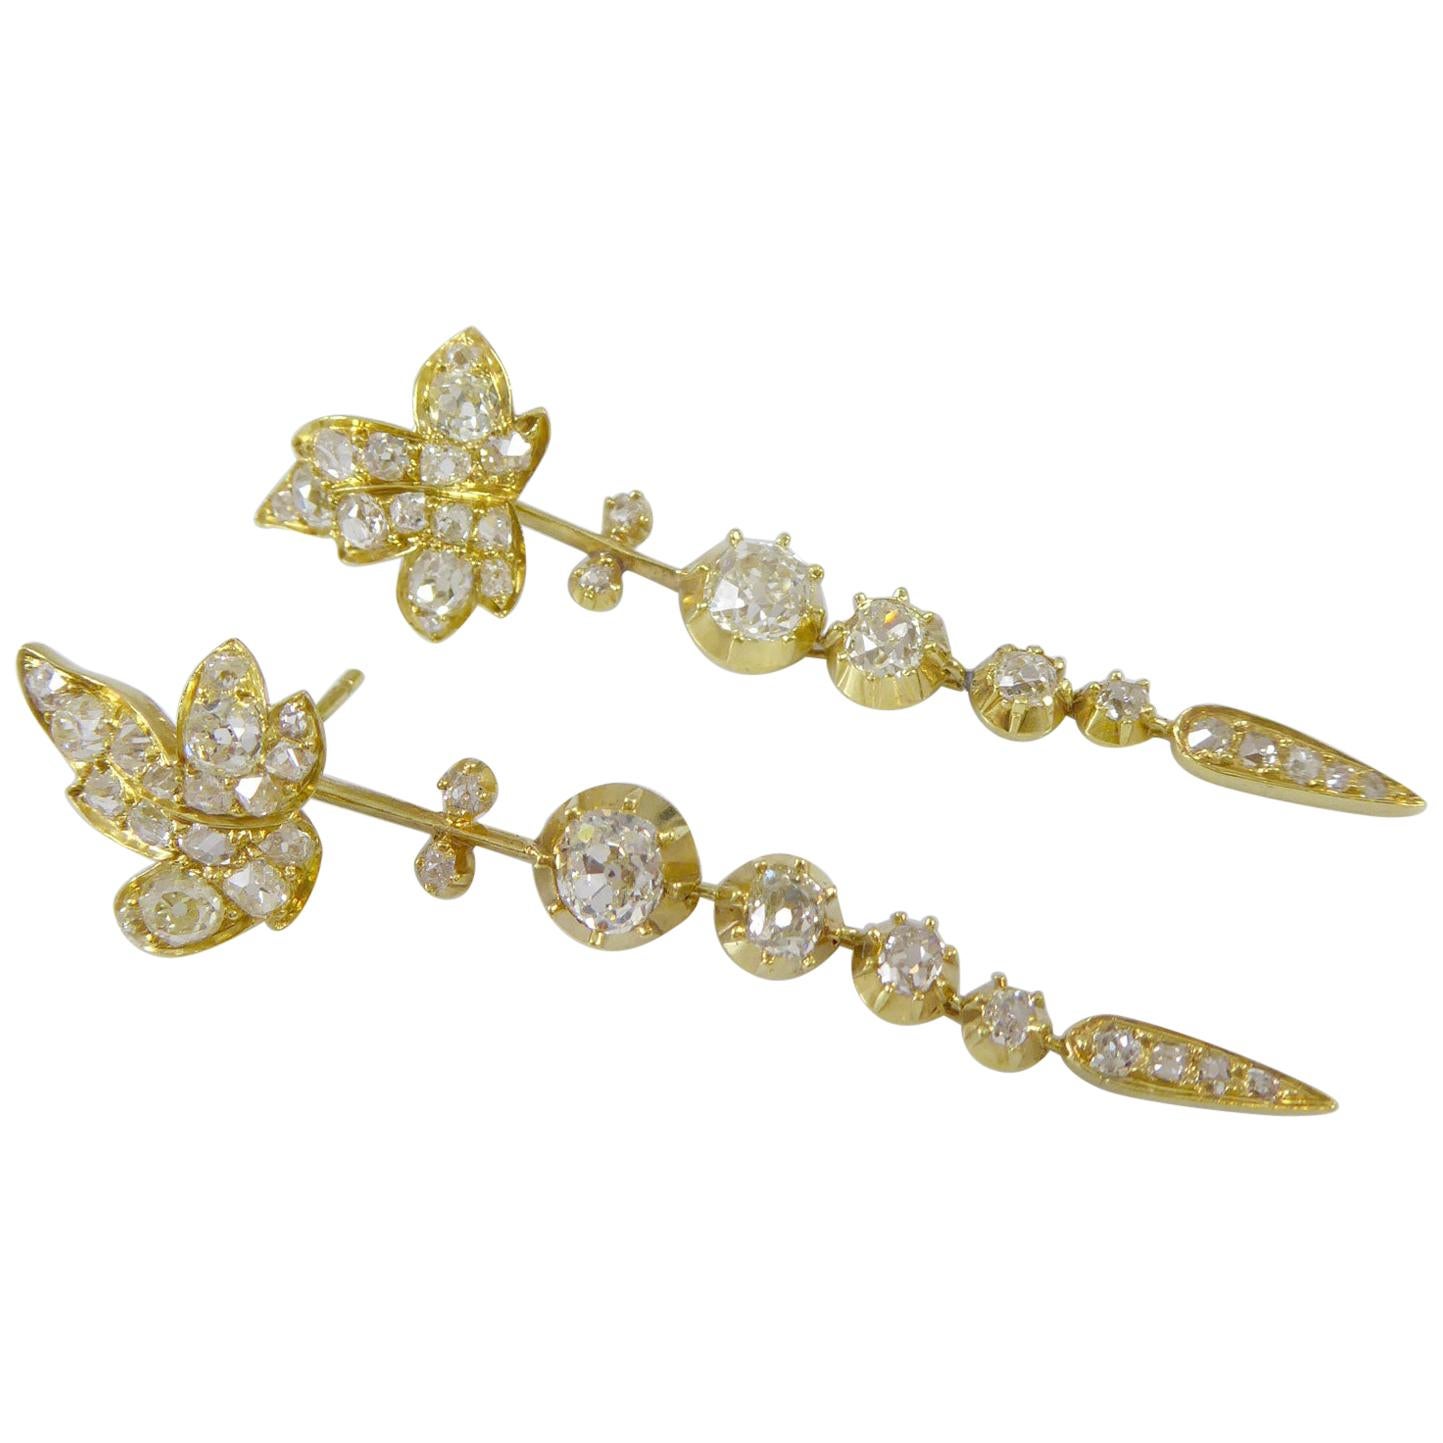 Victorian Diamond "Day and Night" Earrings in Yellow Gold